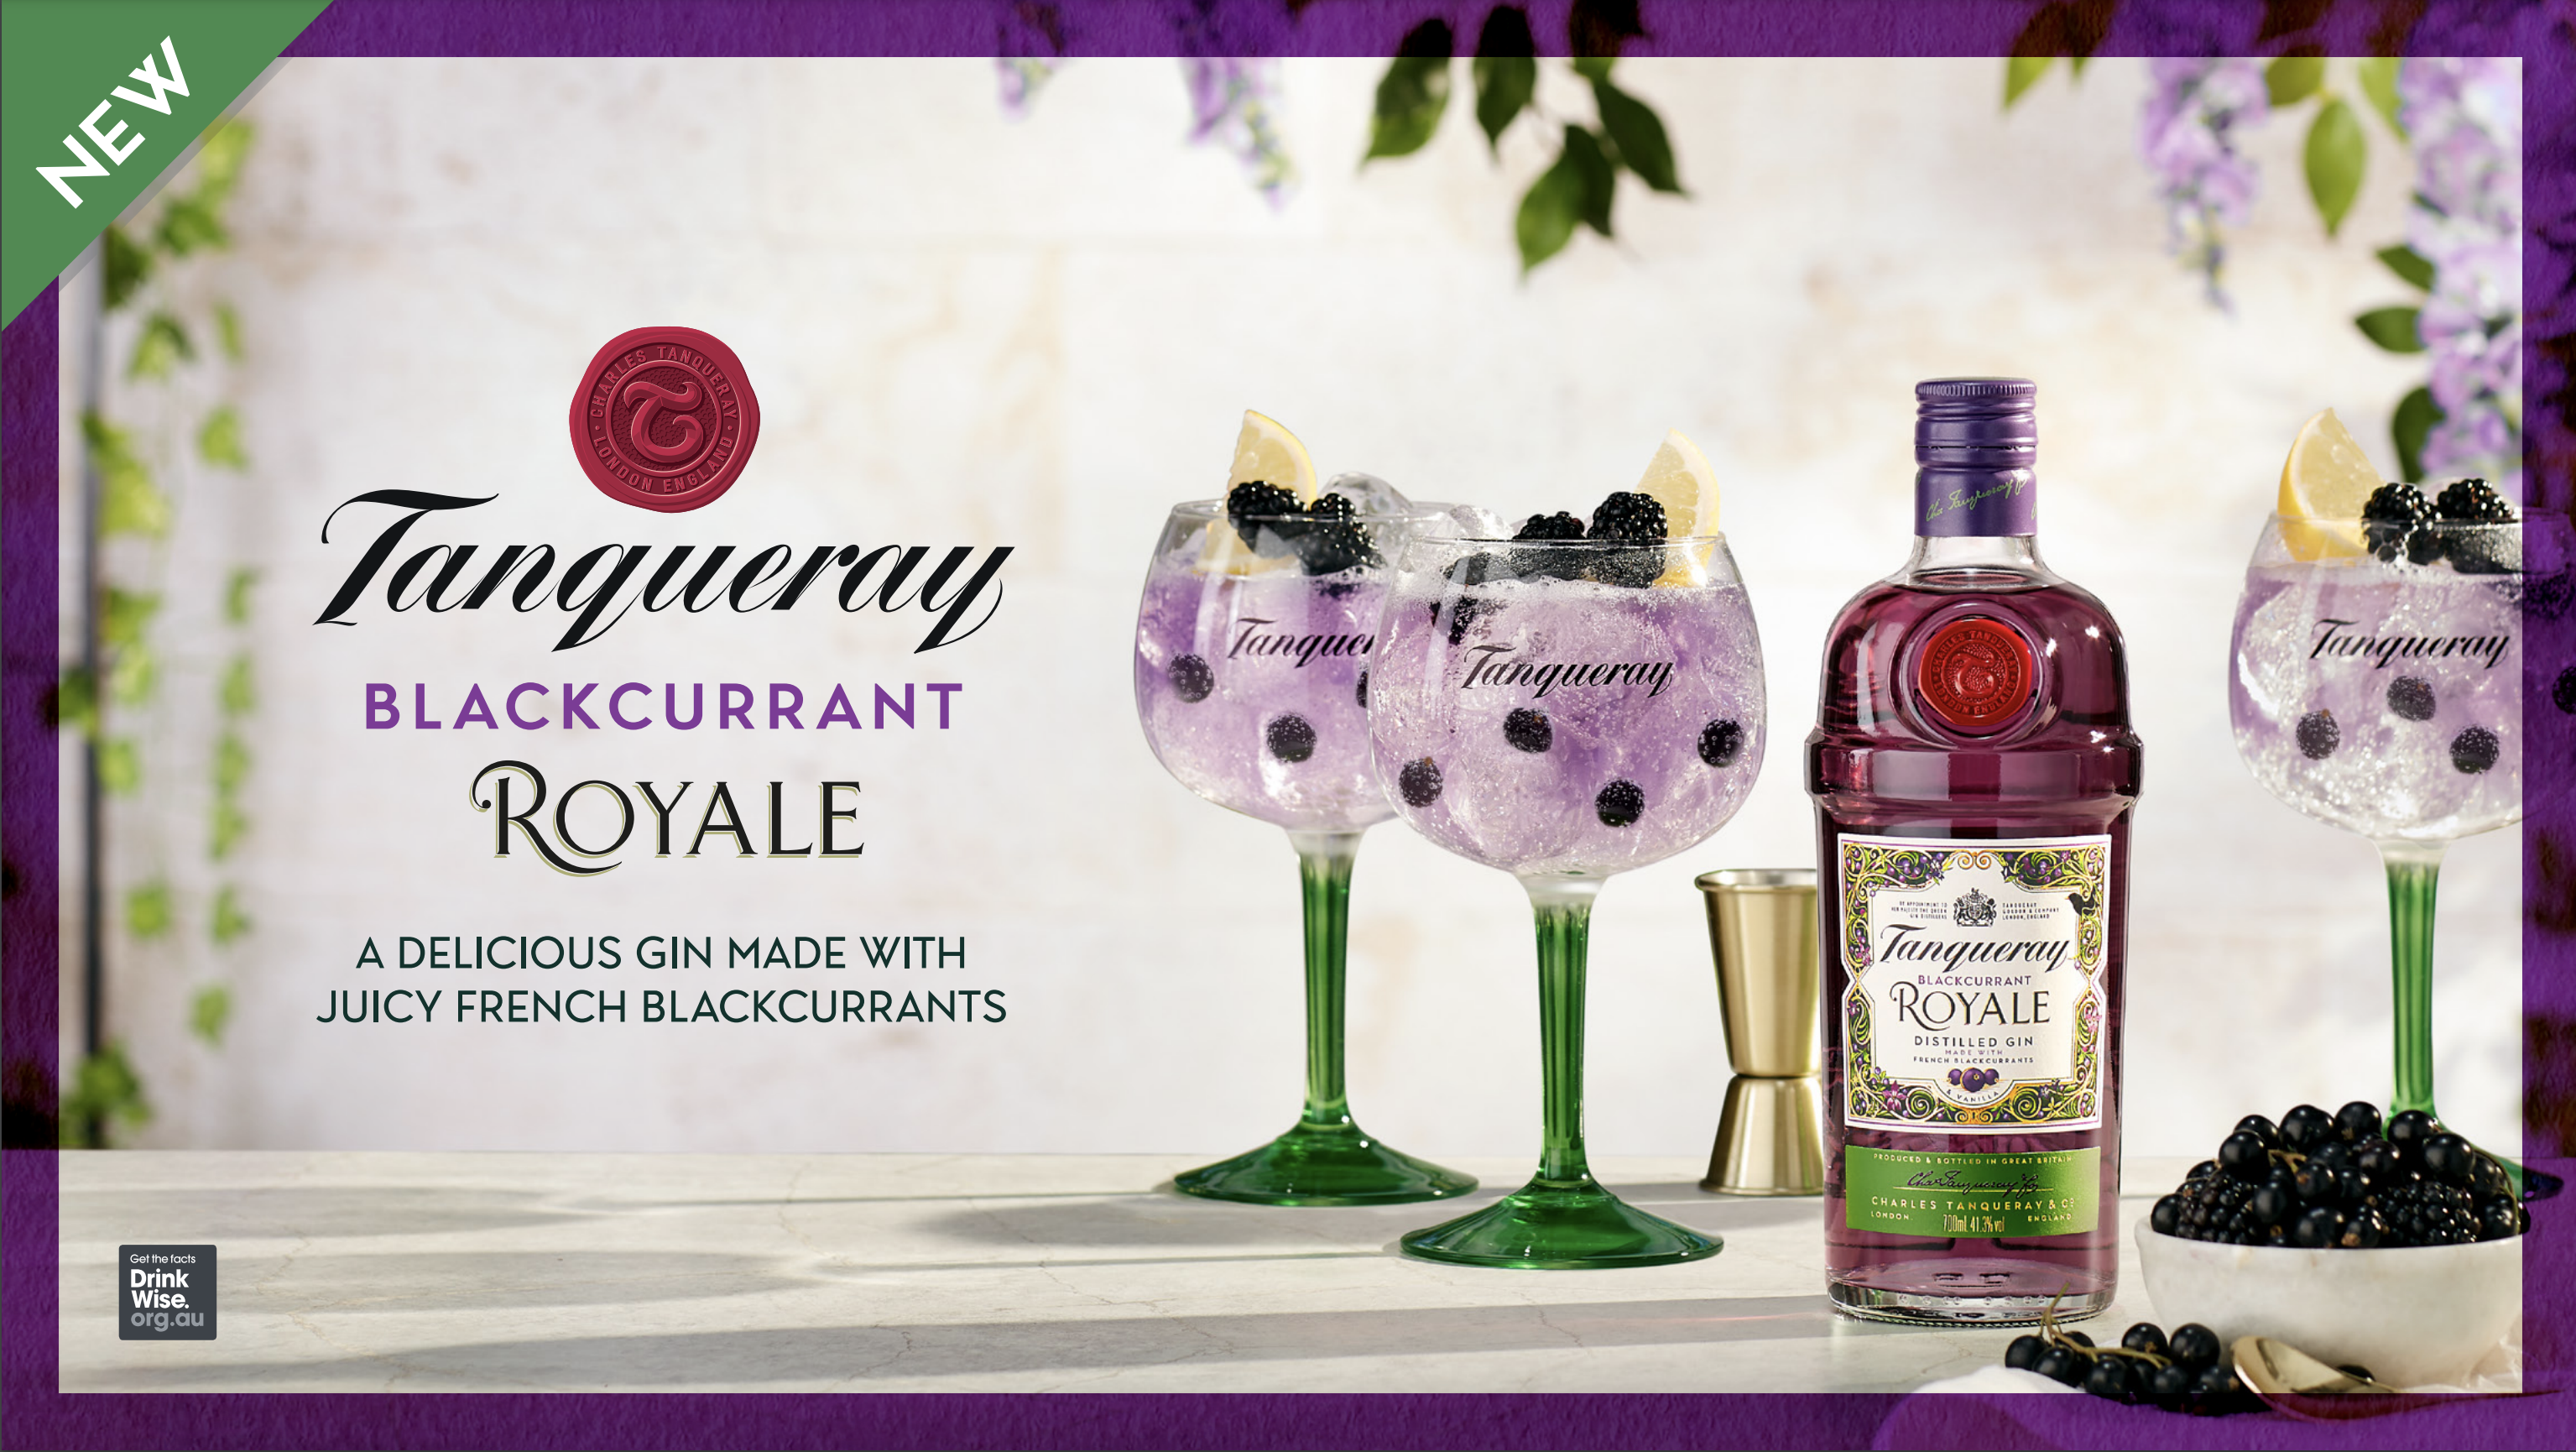 We welcome to the Tanqueray family, Tanqueray Royale!